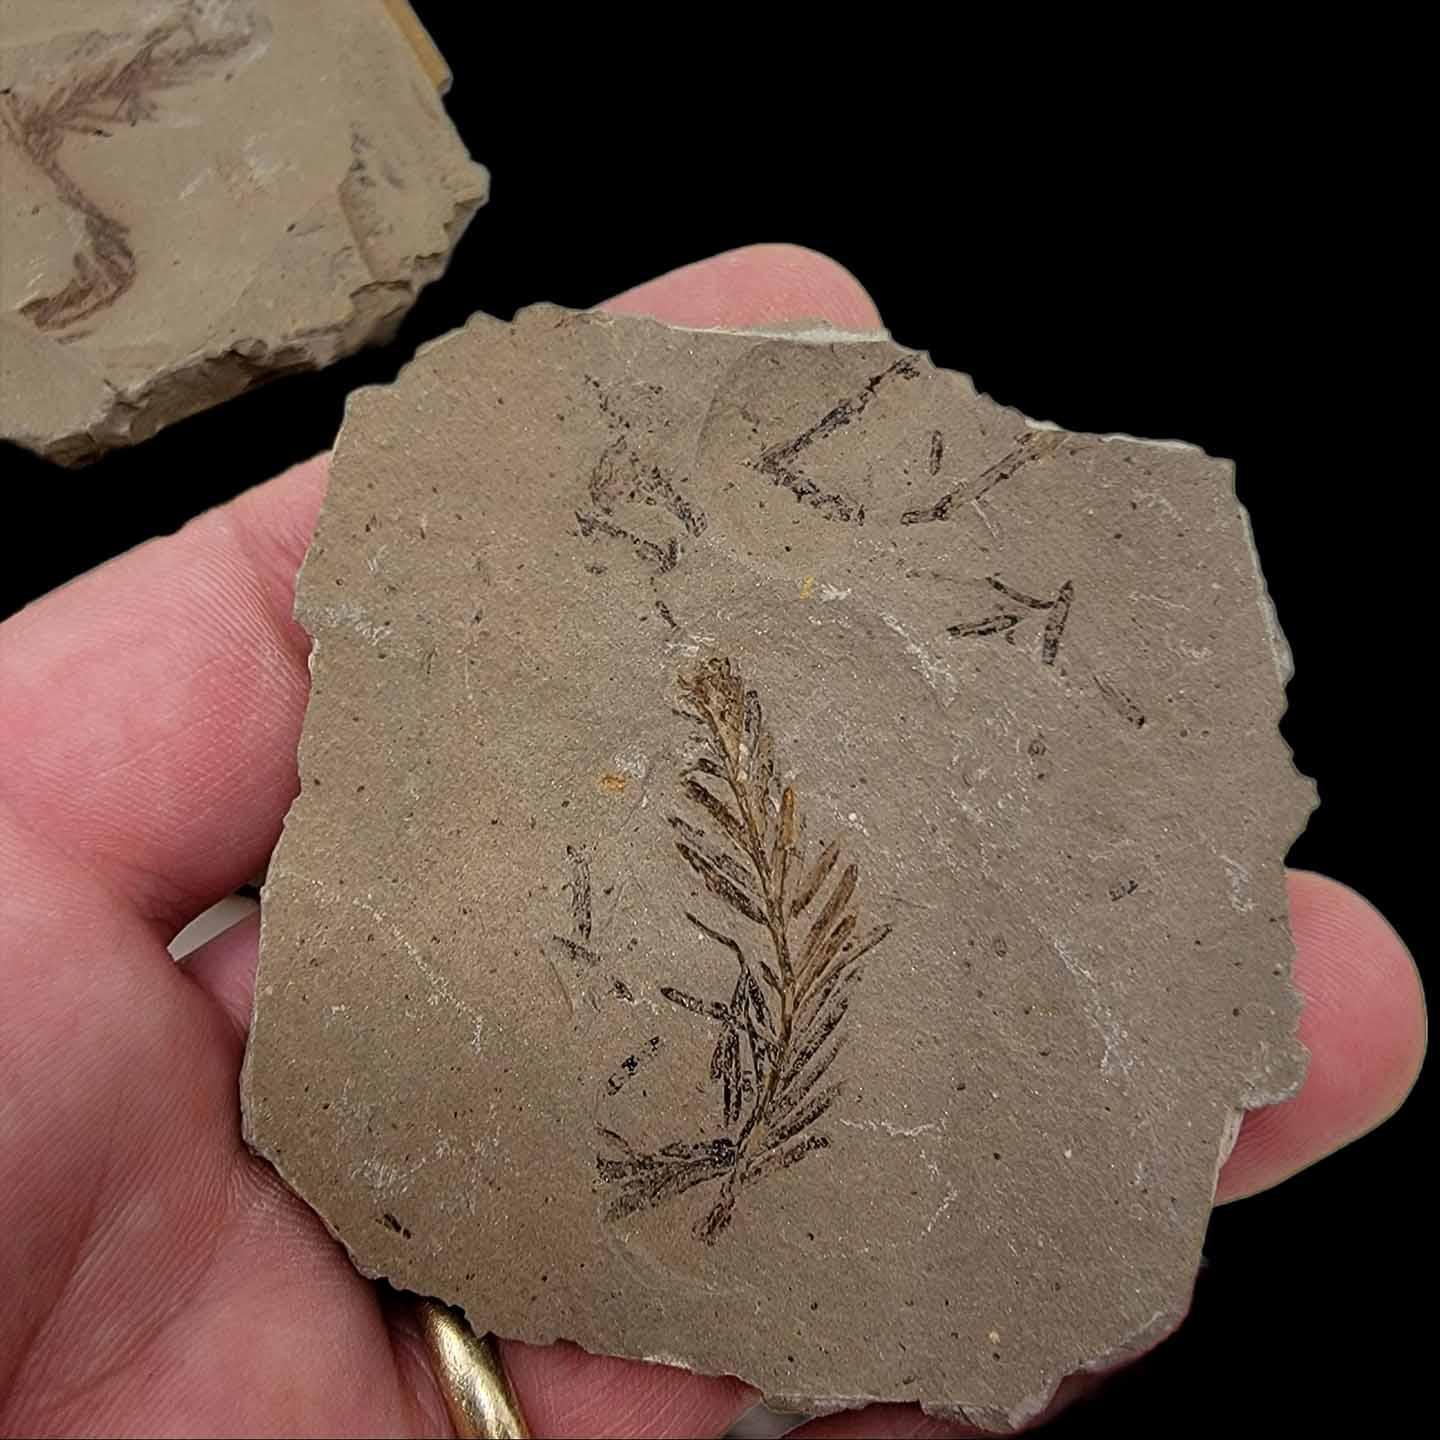 Dawn Redwood Metasequoia Plate Fossil Specimens! - LapidaryCentral